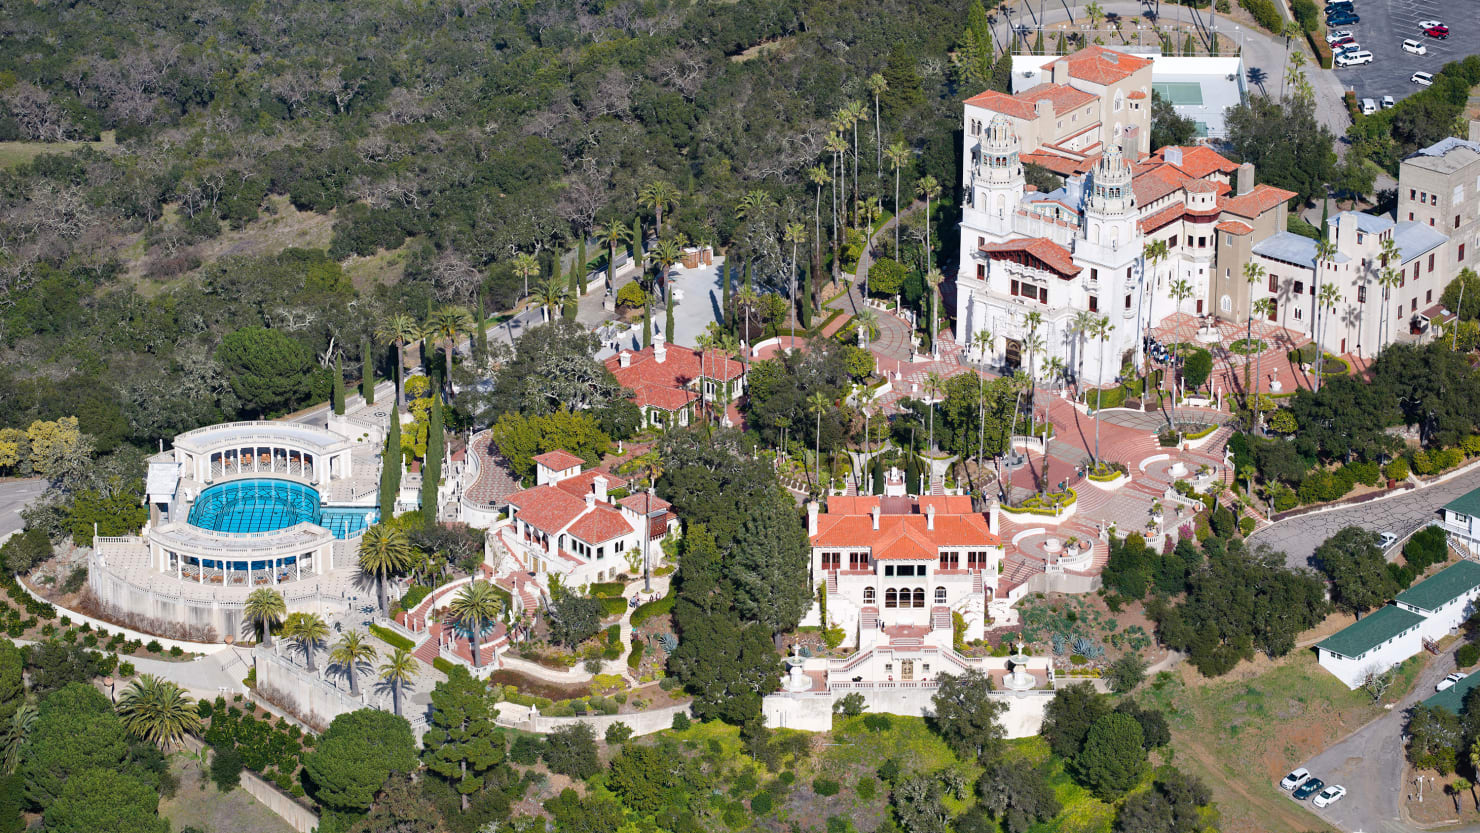 California’s Most Famous House Was a Battle With Owner’s Shopping Addiction